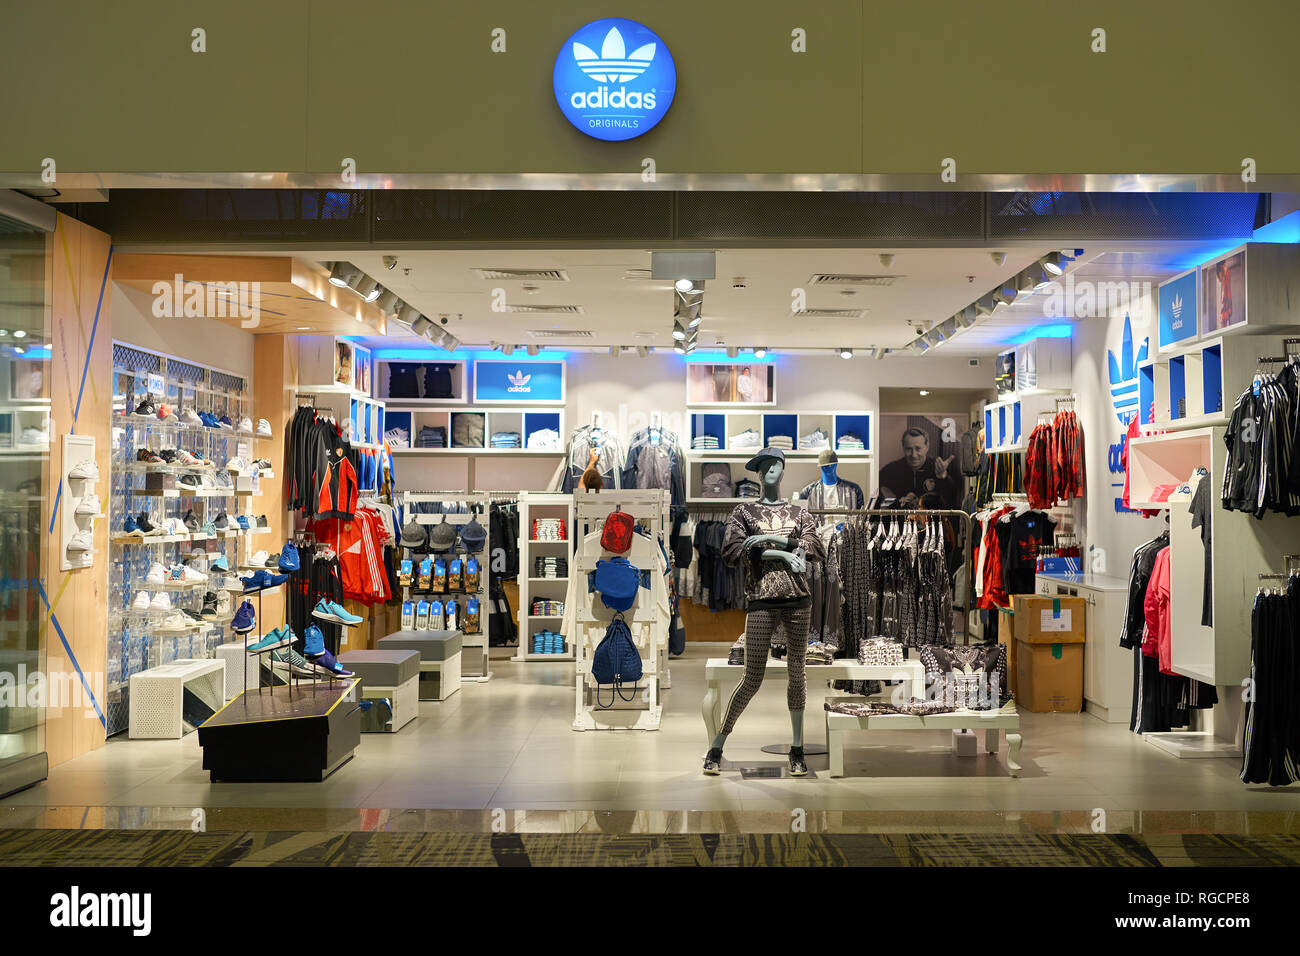 Bloodstained Concise Endure adidas store barcelona airport malt box Captain  brie